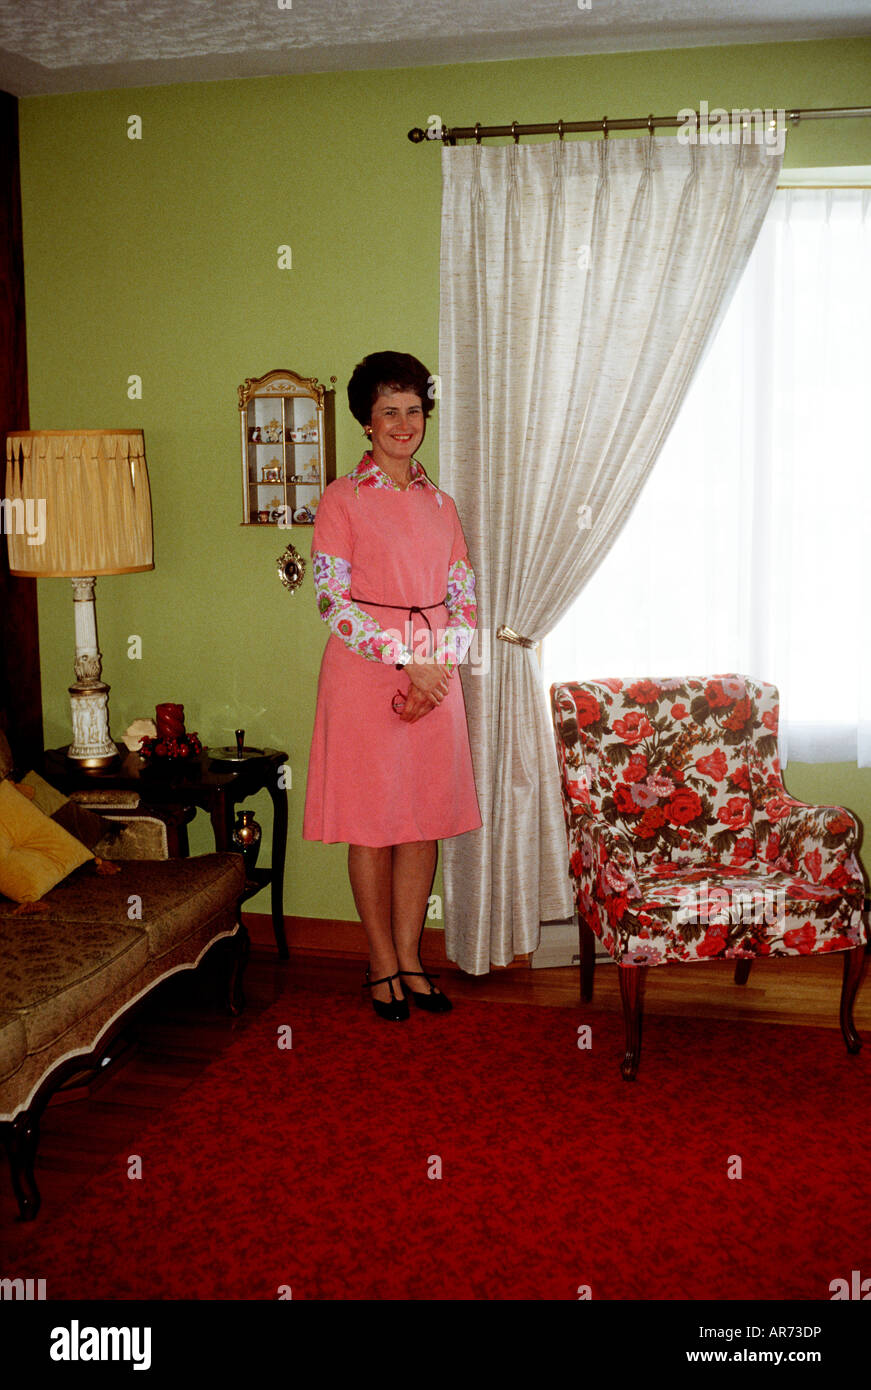 70s housewife in pink dress stands proudly in the corner of red and yellow living room. Patterned chair and ornate couch. Stock Photo